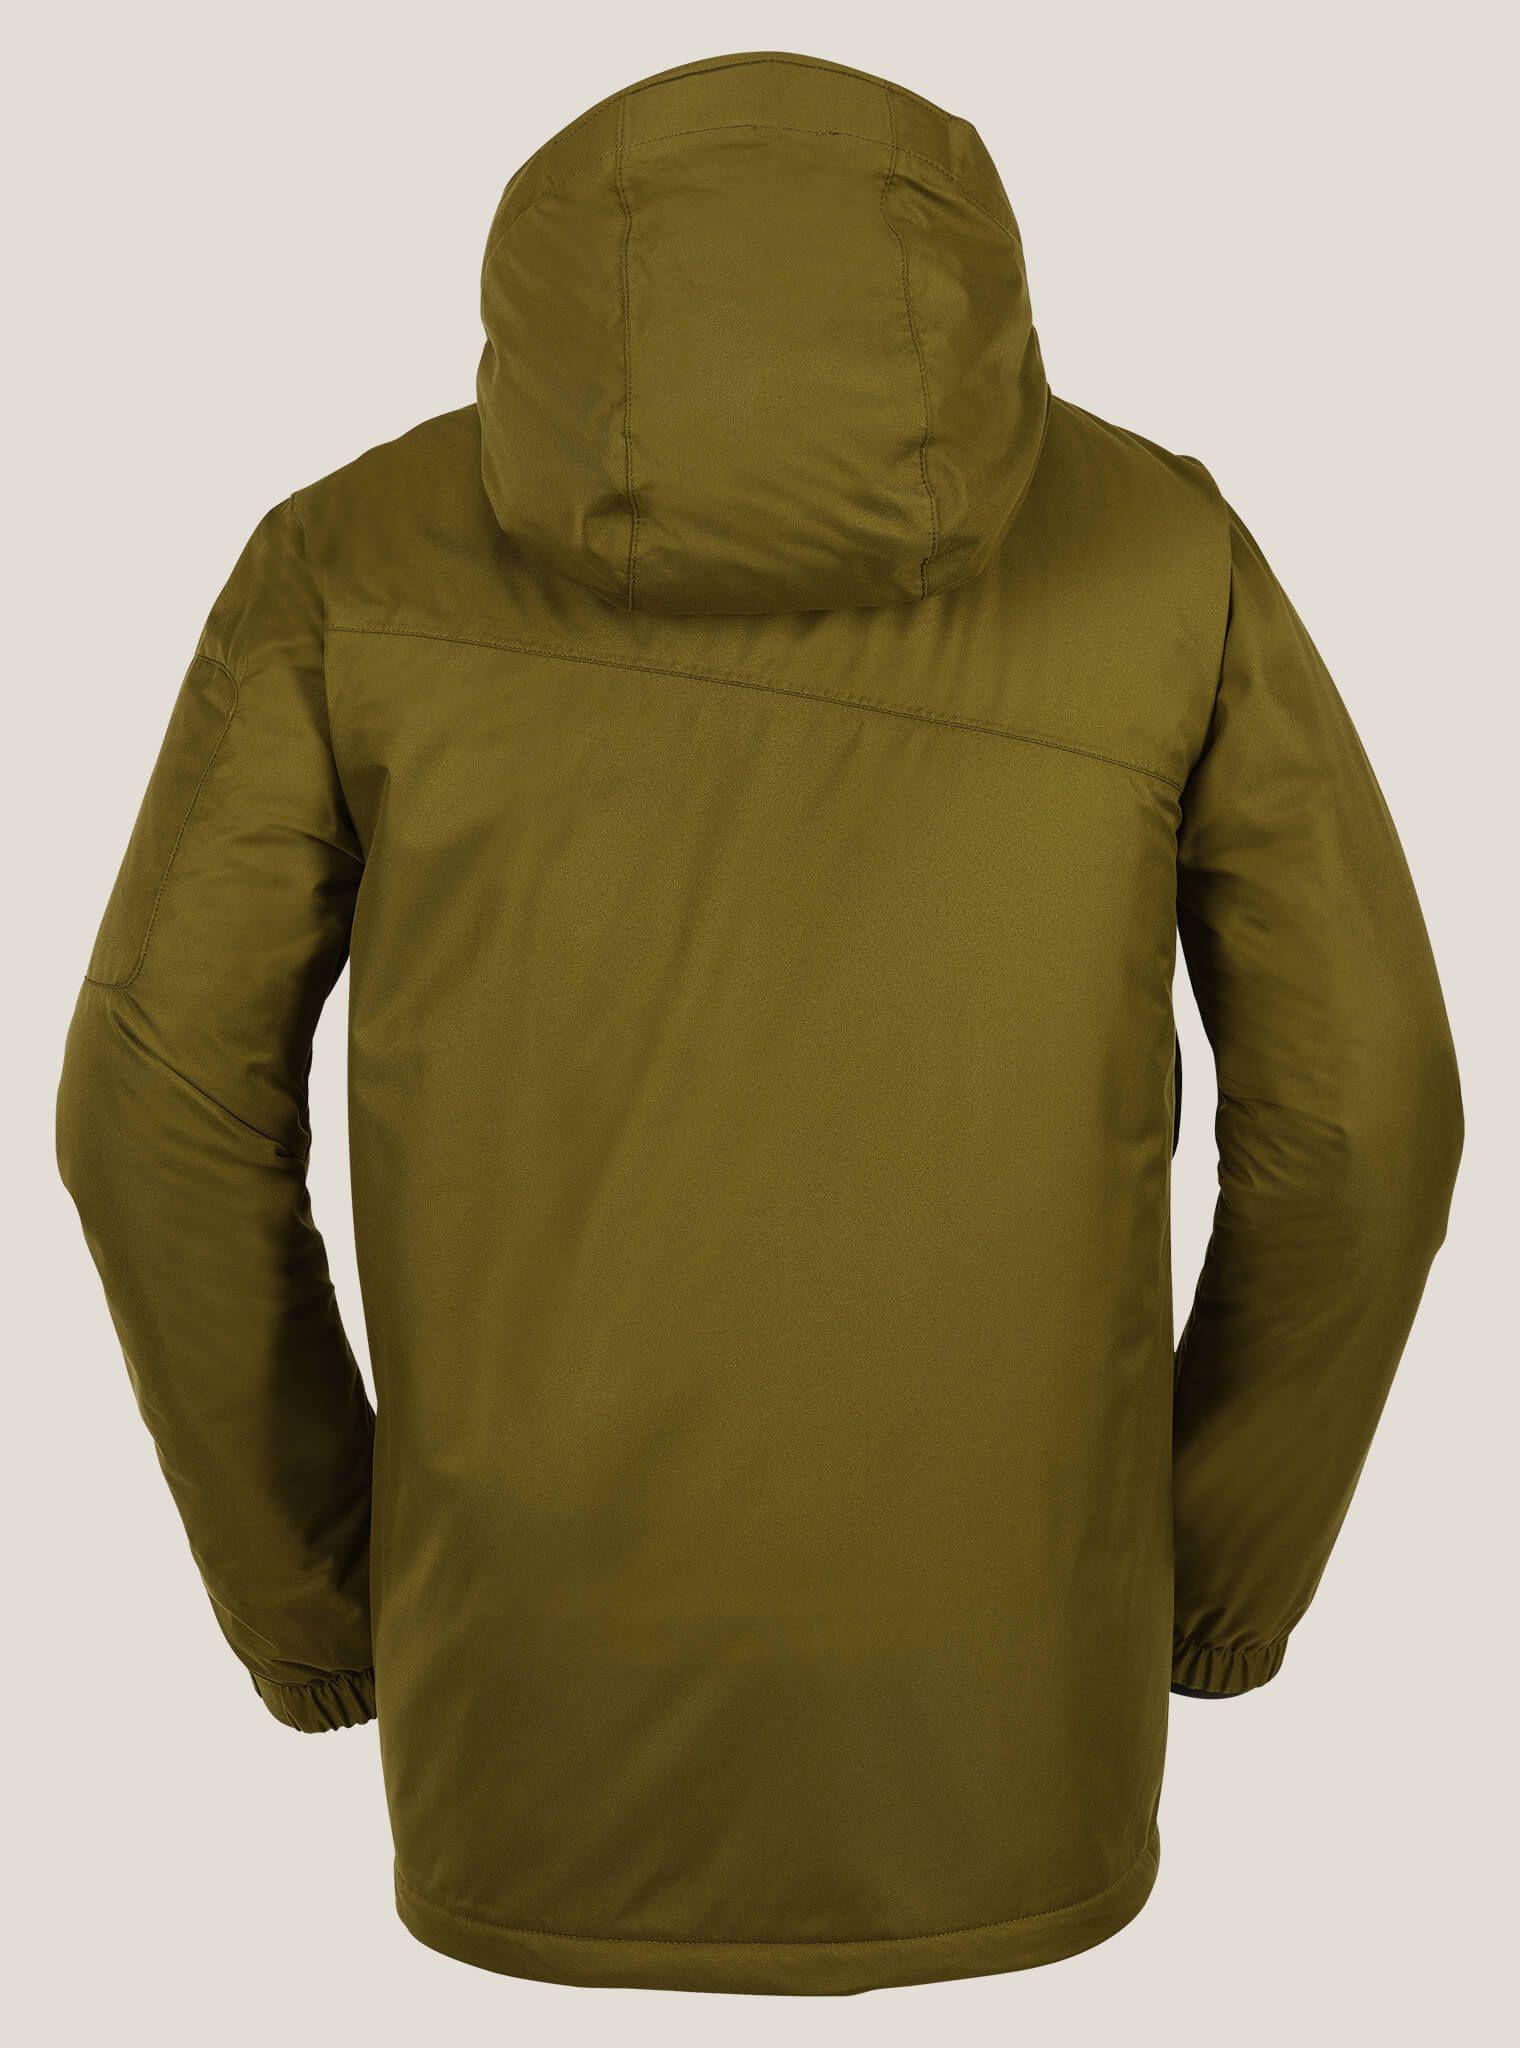 Lyst - Volcom Padron Insulated Jacket in Green for Men